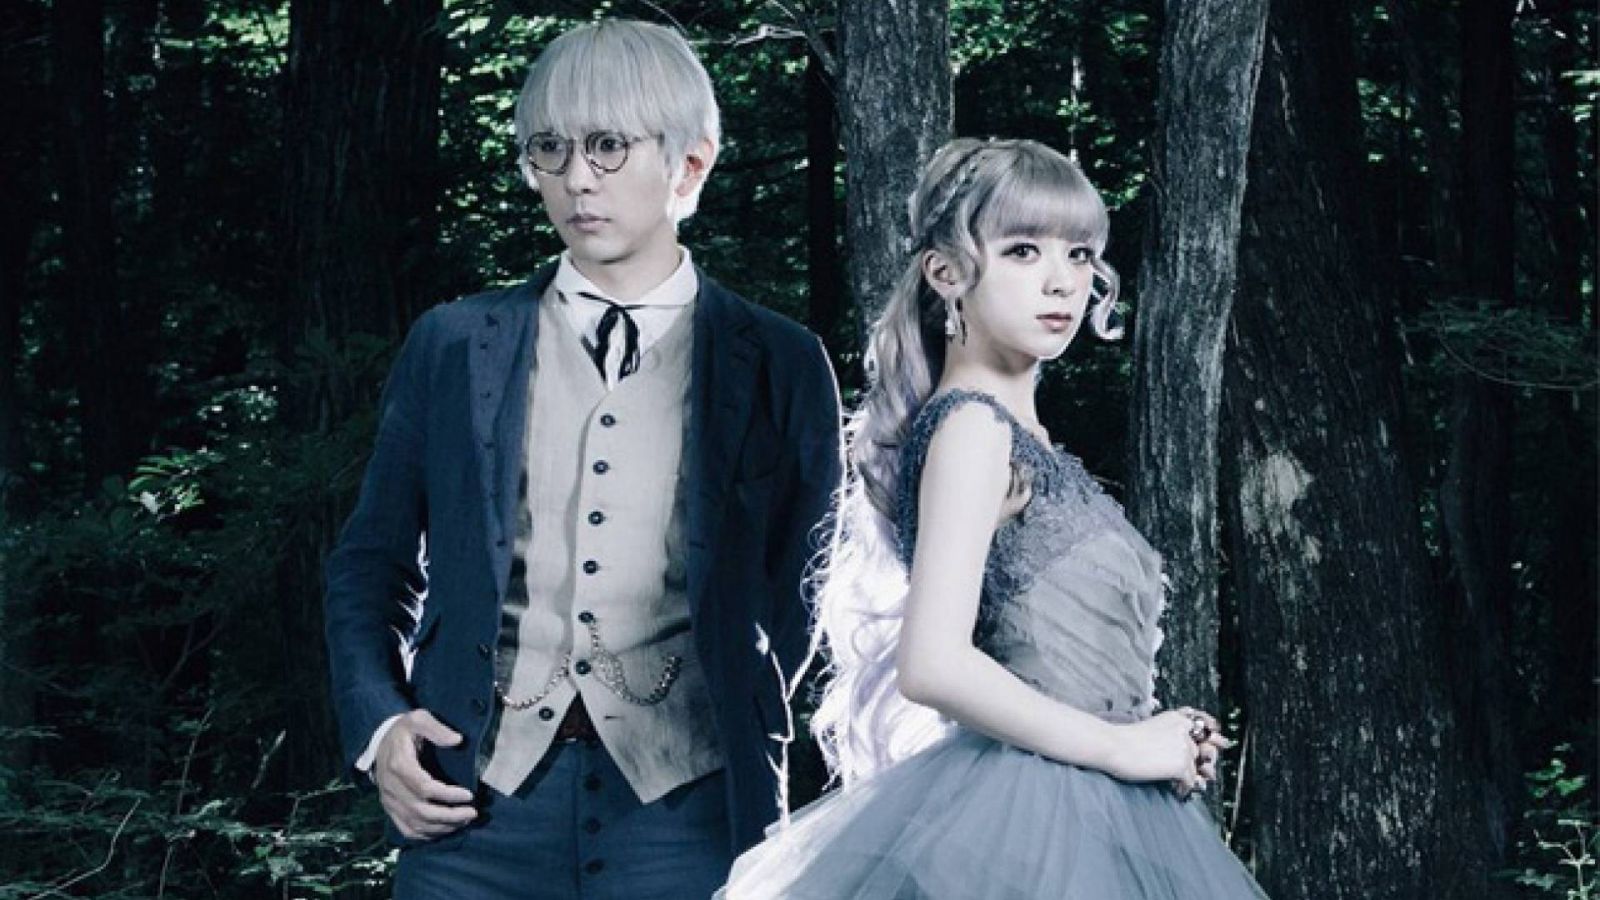 Video Interview with GARNiDELiA at Anime Expo 2017 © 2017 Sony Music Entertainment (Japan) Inc. All rights reserved.